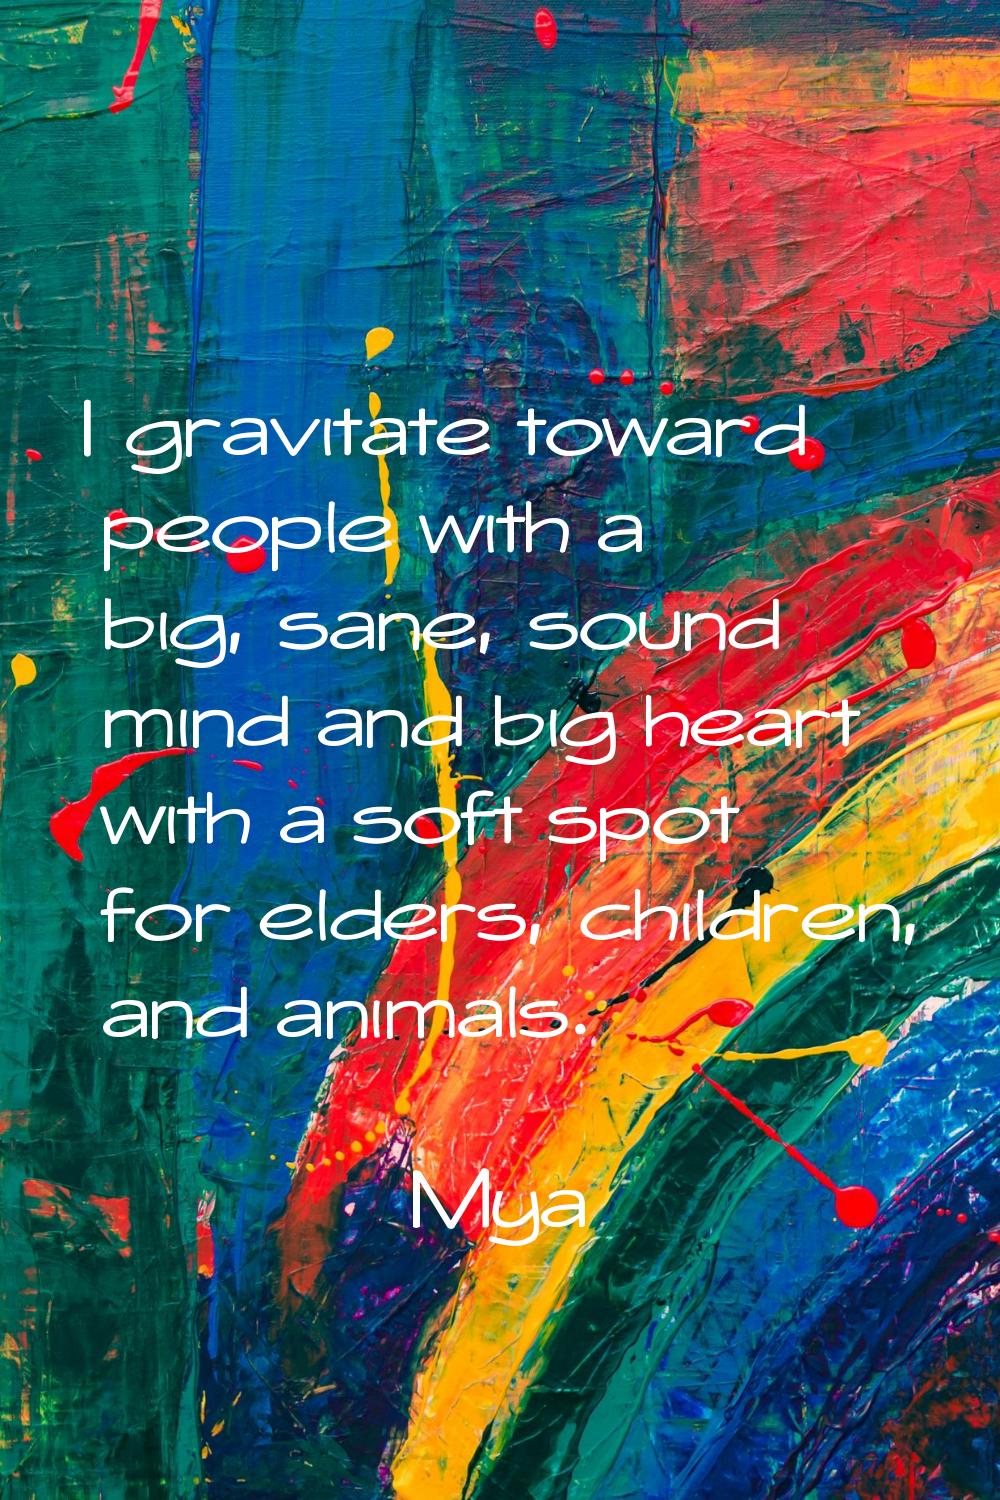 I gravitate toward people with a big, sane, sound mind and big heart with a soft spot for elders, c